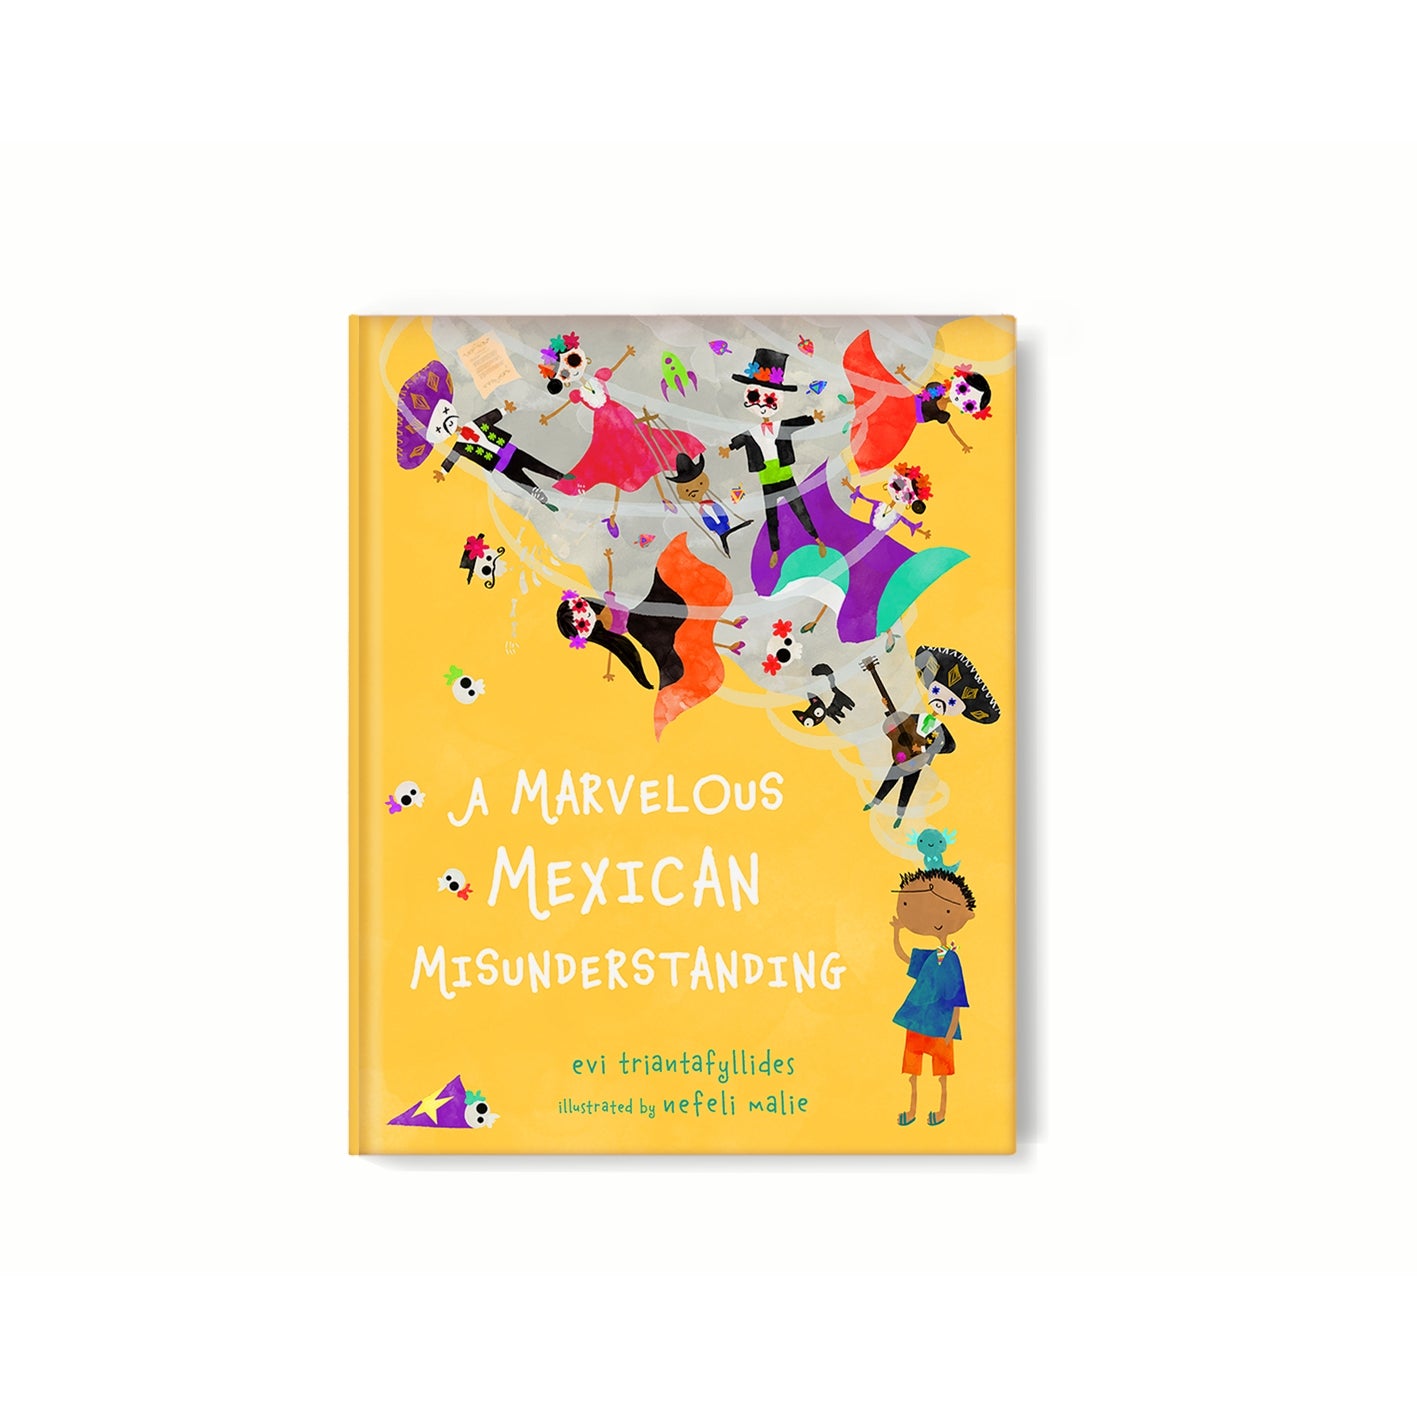 A Marvelous Mexican Misunderstanding Hardcover Book